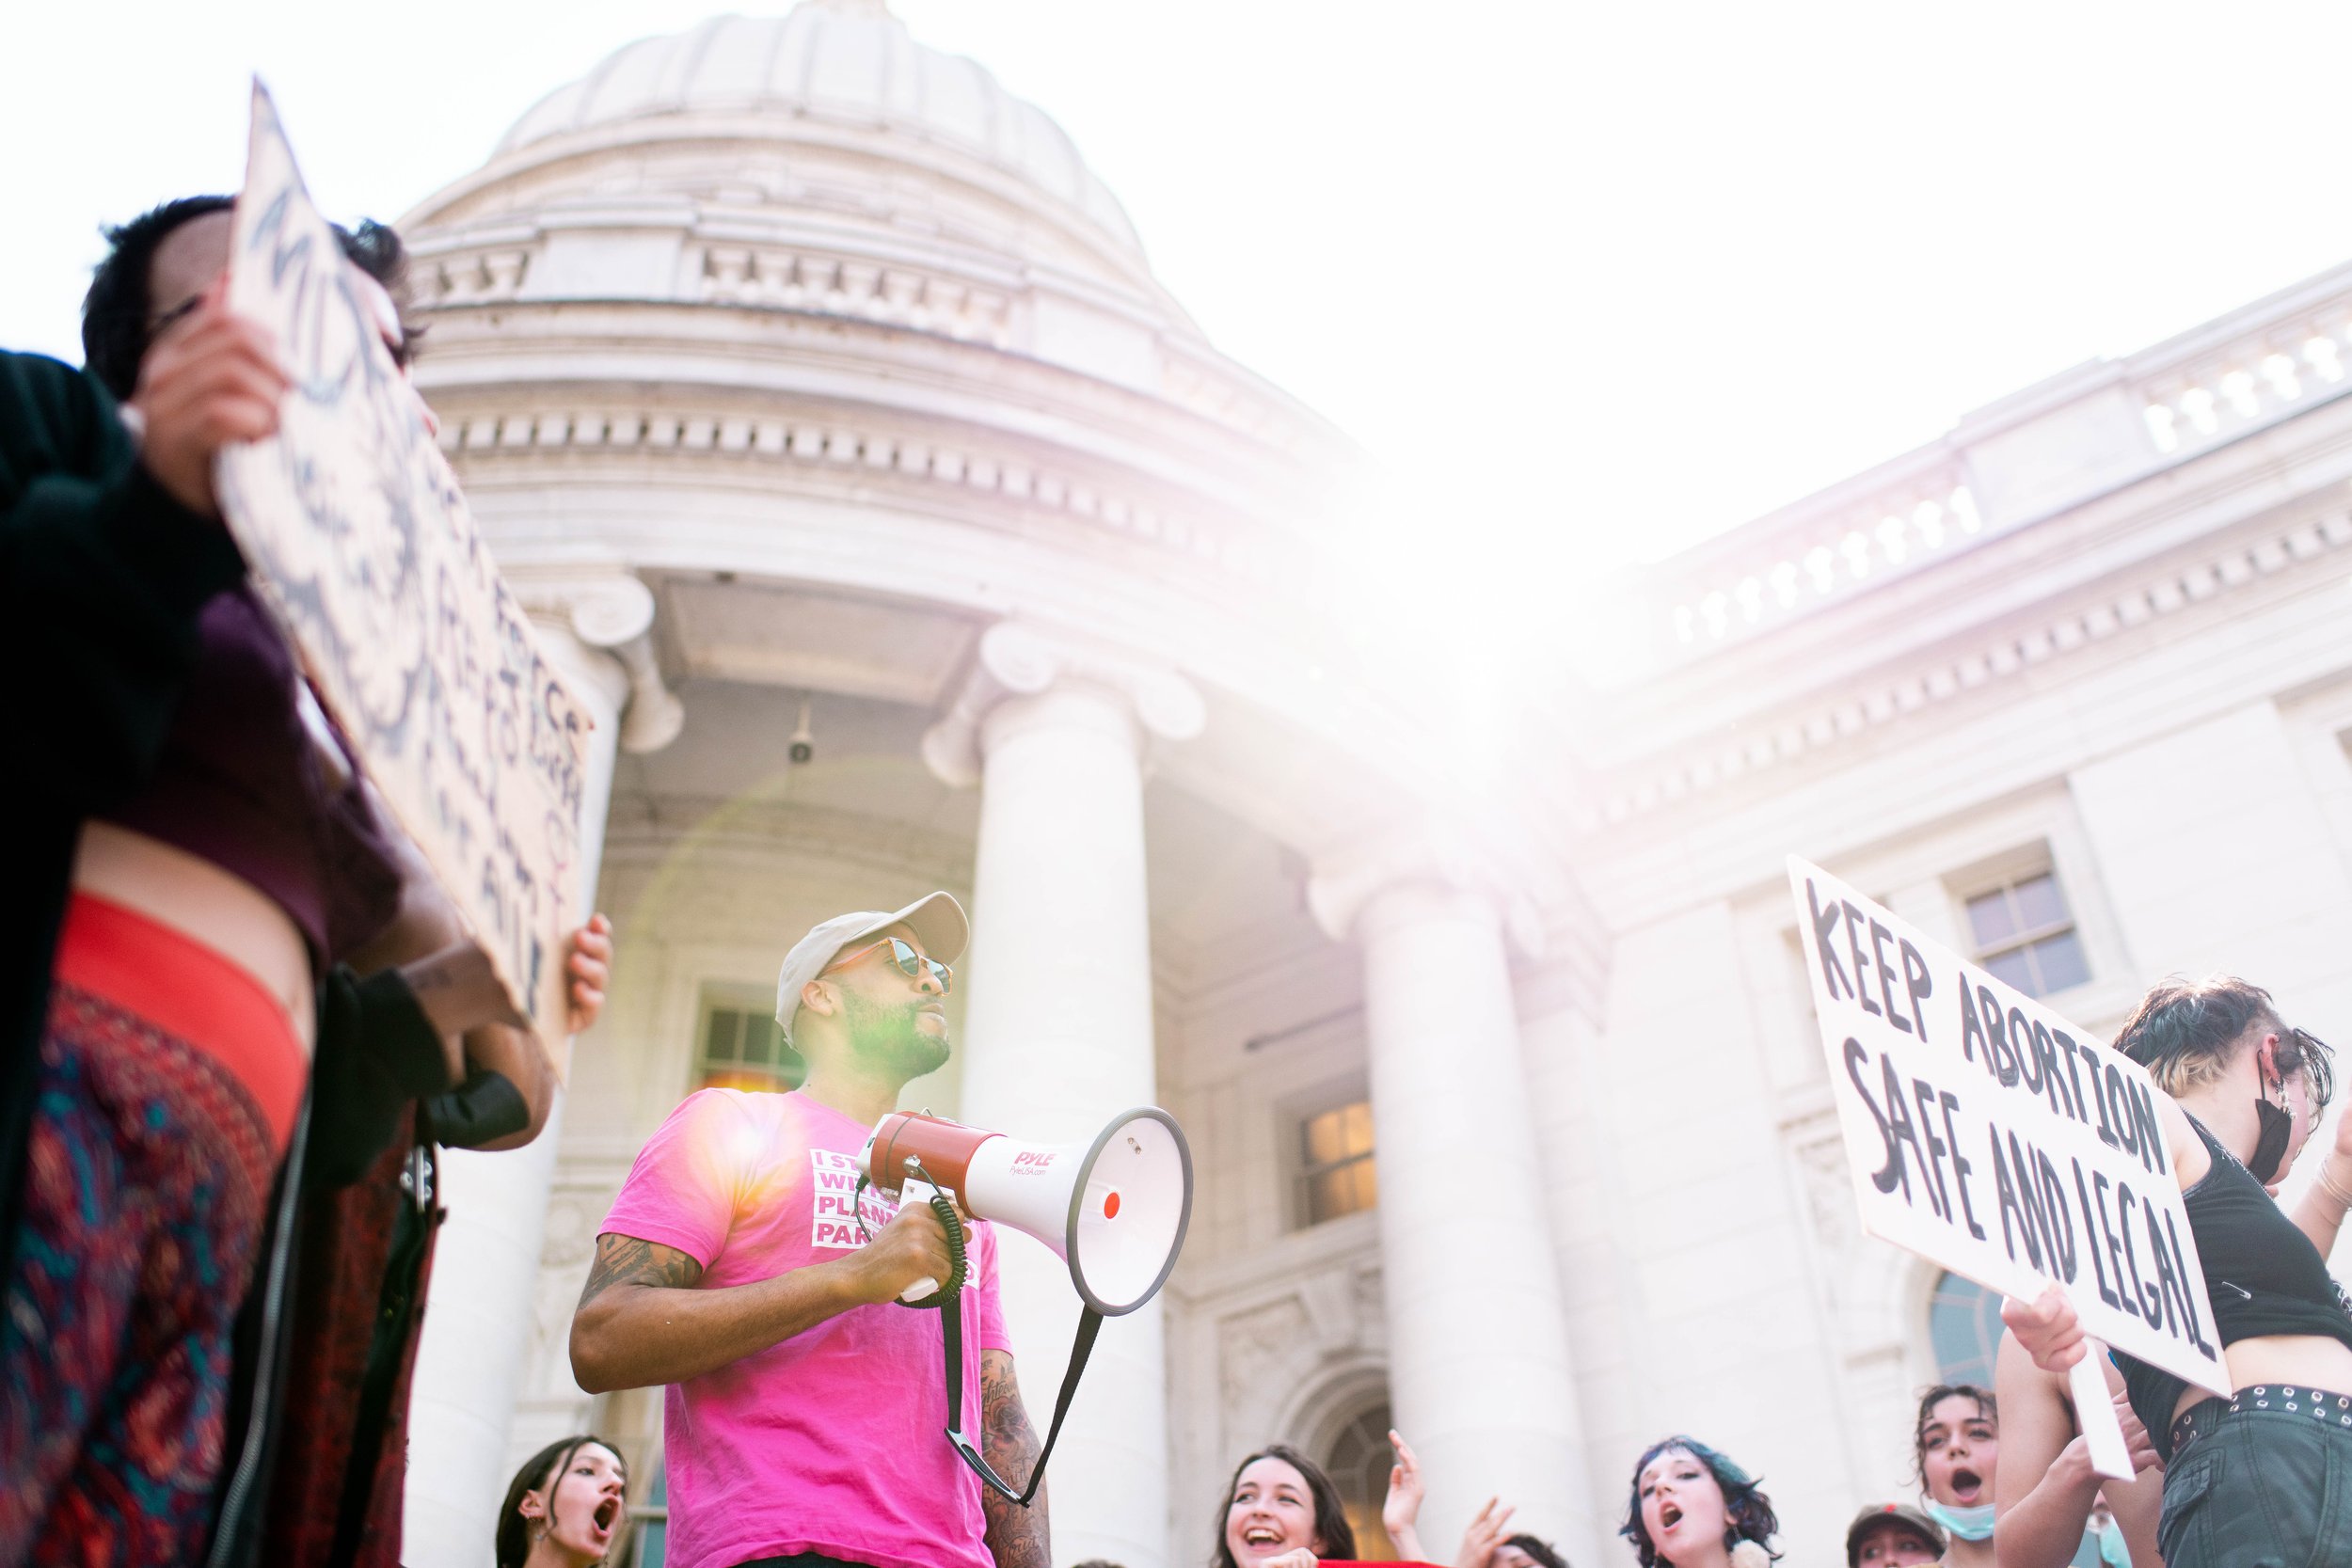 Lt. Governor Mandela Barnes at a rally for abortion rights, Wisconsin, 2022